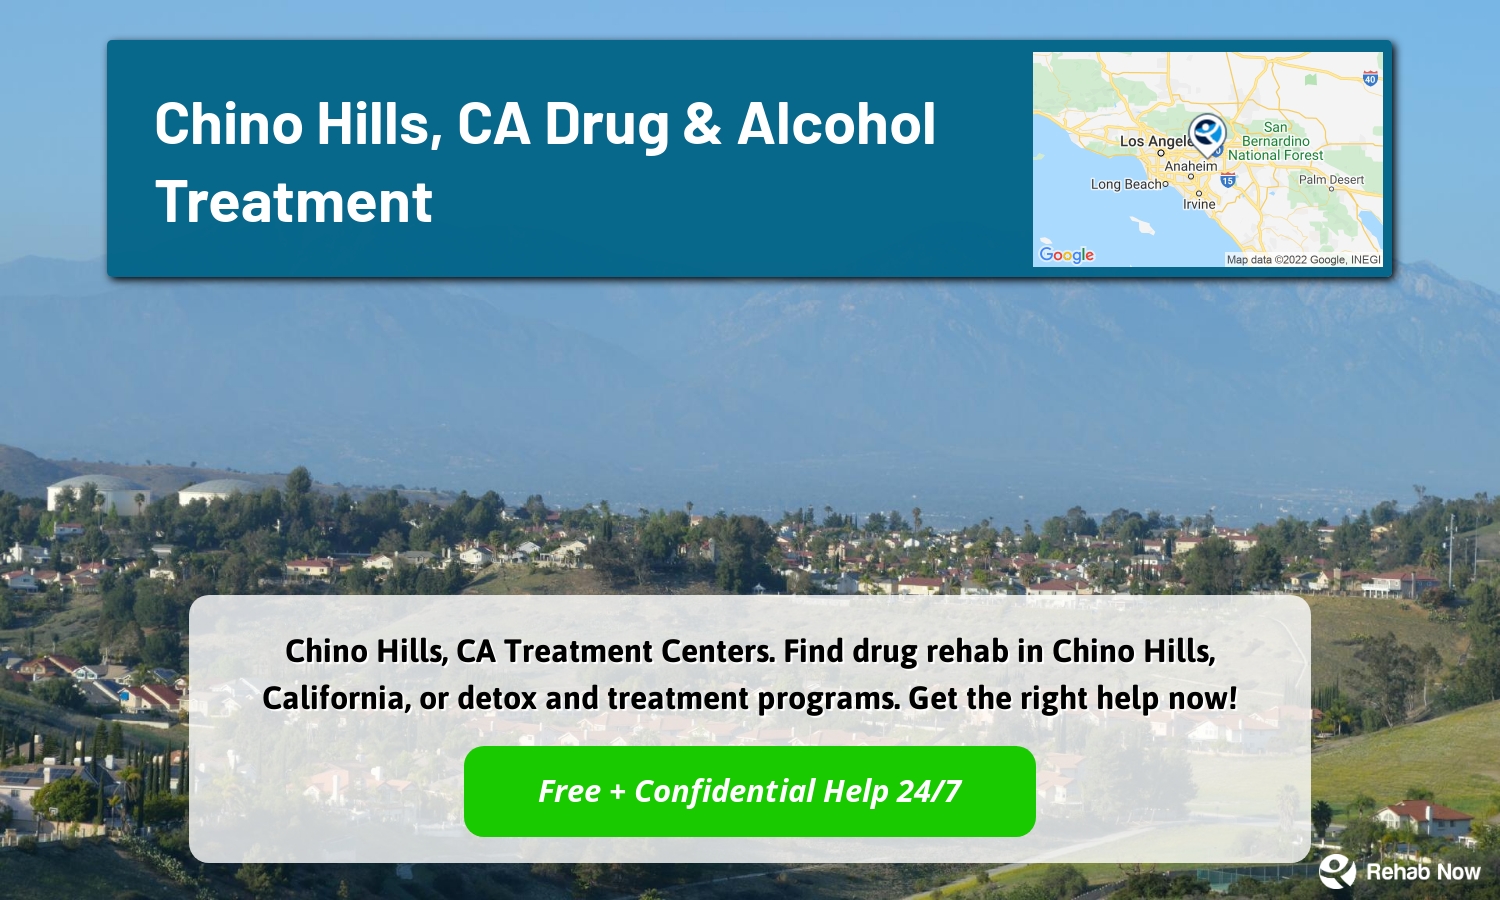 Chino Hills, CA Treatment Centers. Find drug rehab in Chino Hills, California, or detox and treatment programs. Get the right help now!